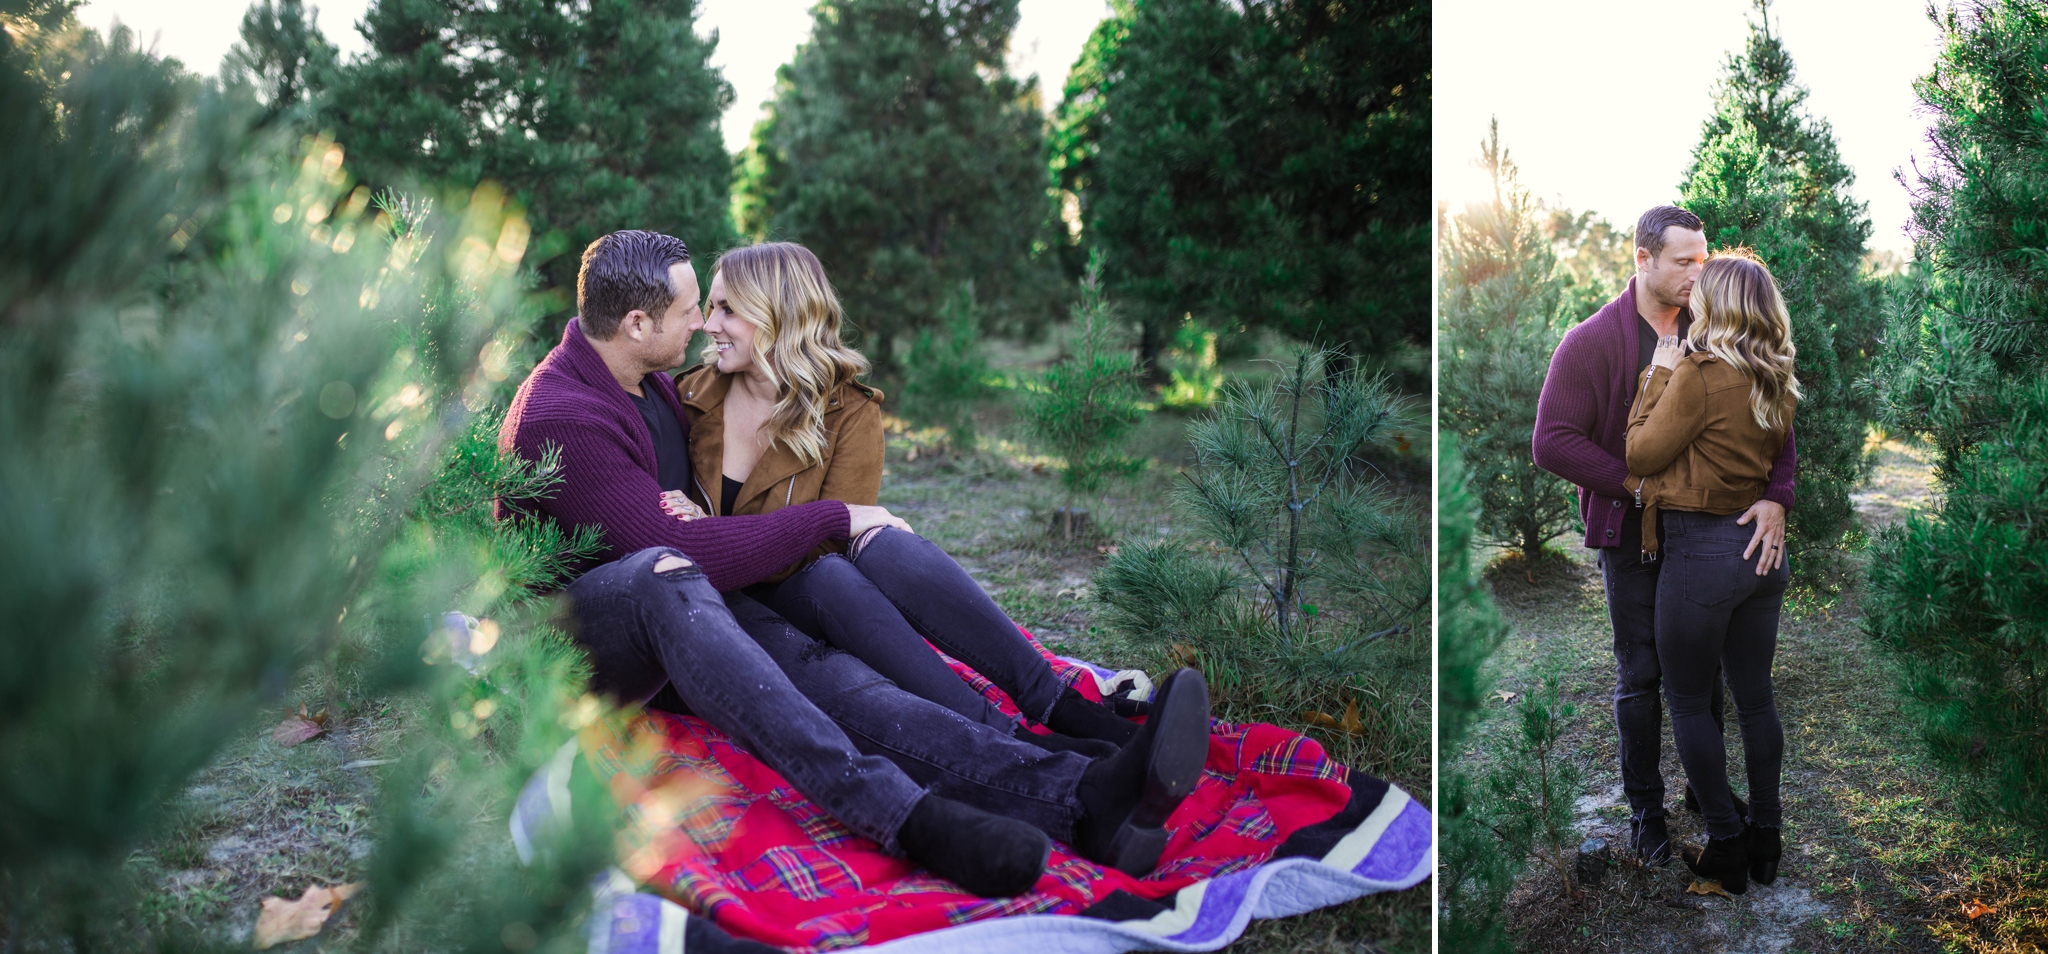 Couples Photography Session at the Christmas Tree Farm - Fayetteville North Carolina Engagement Photographer